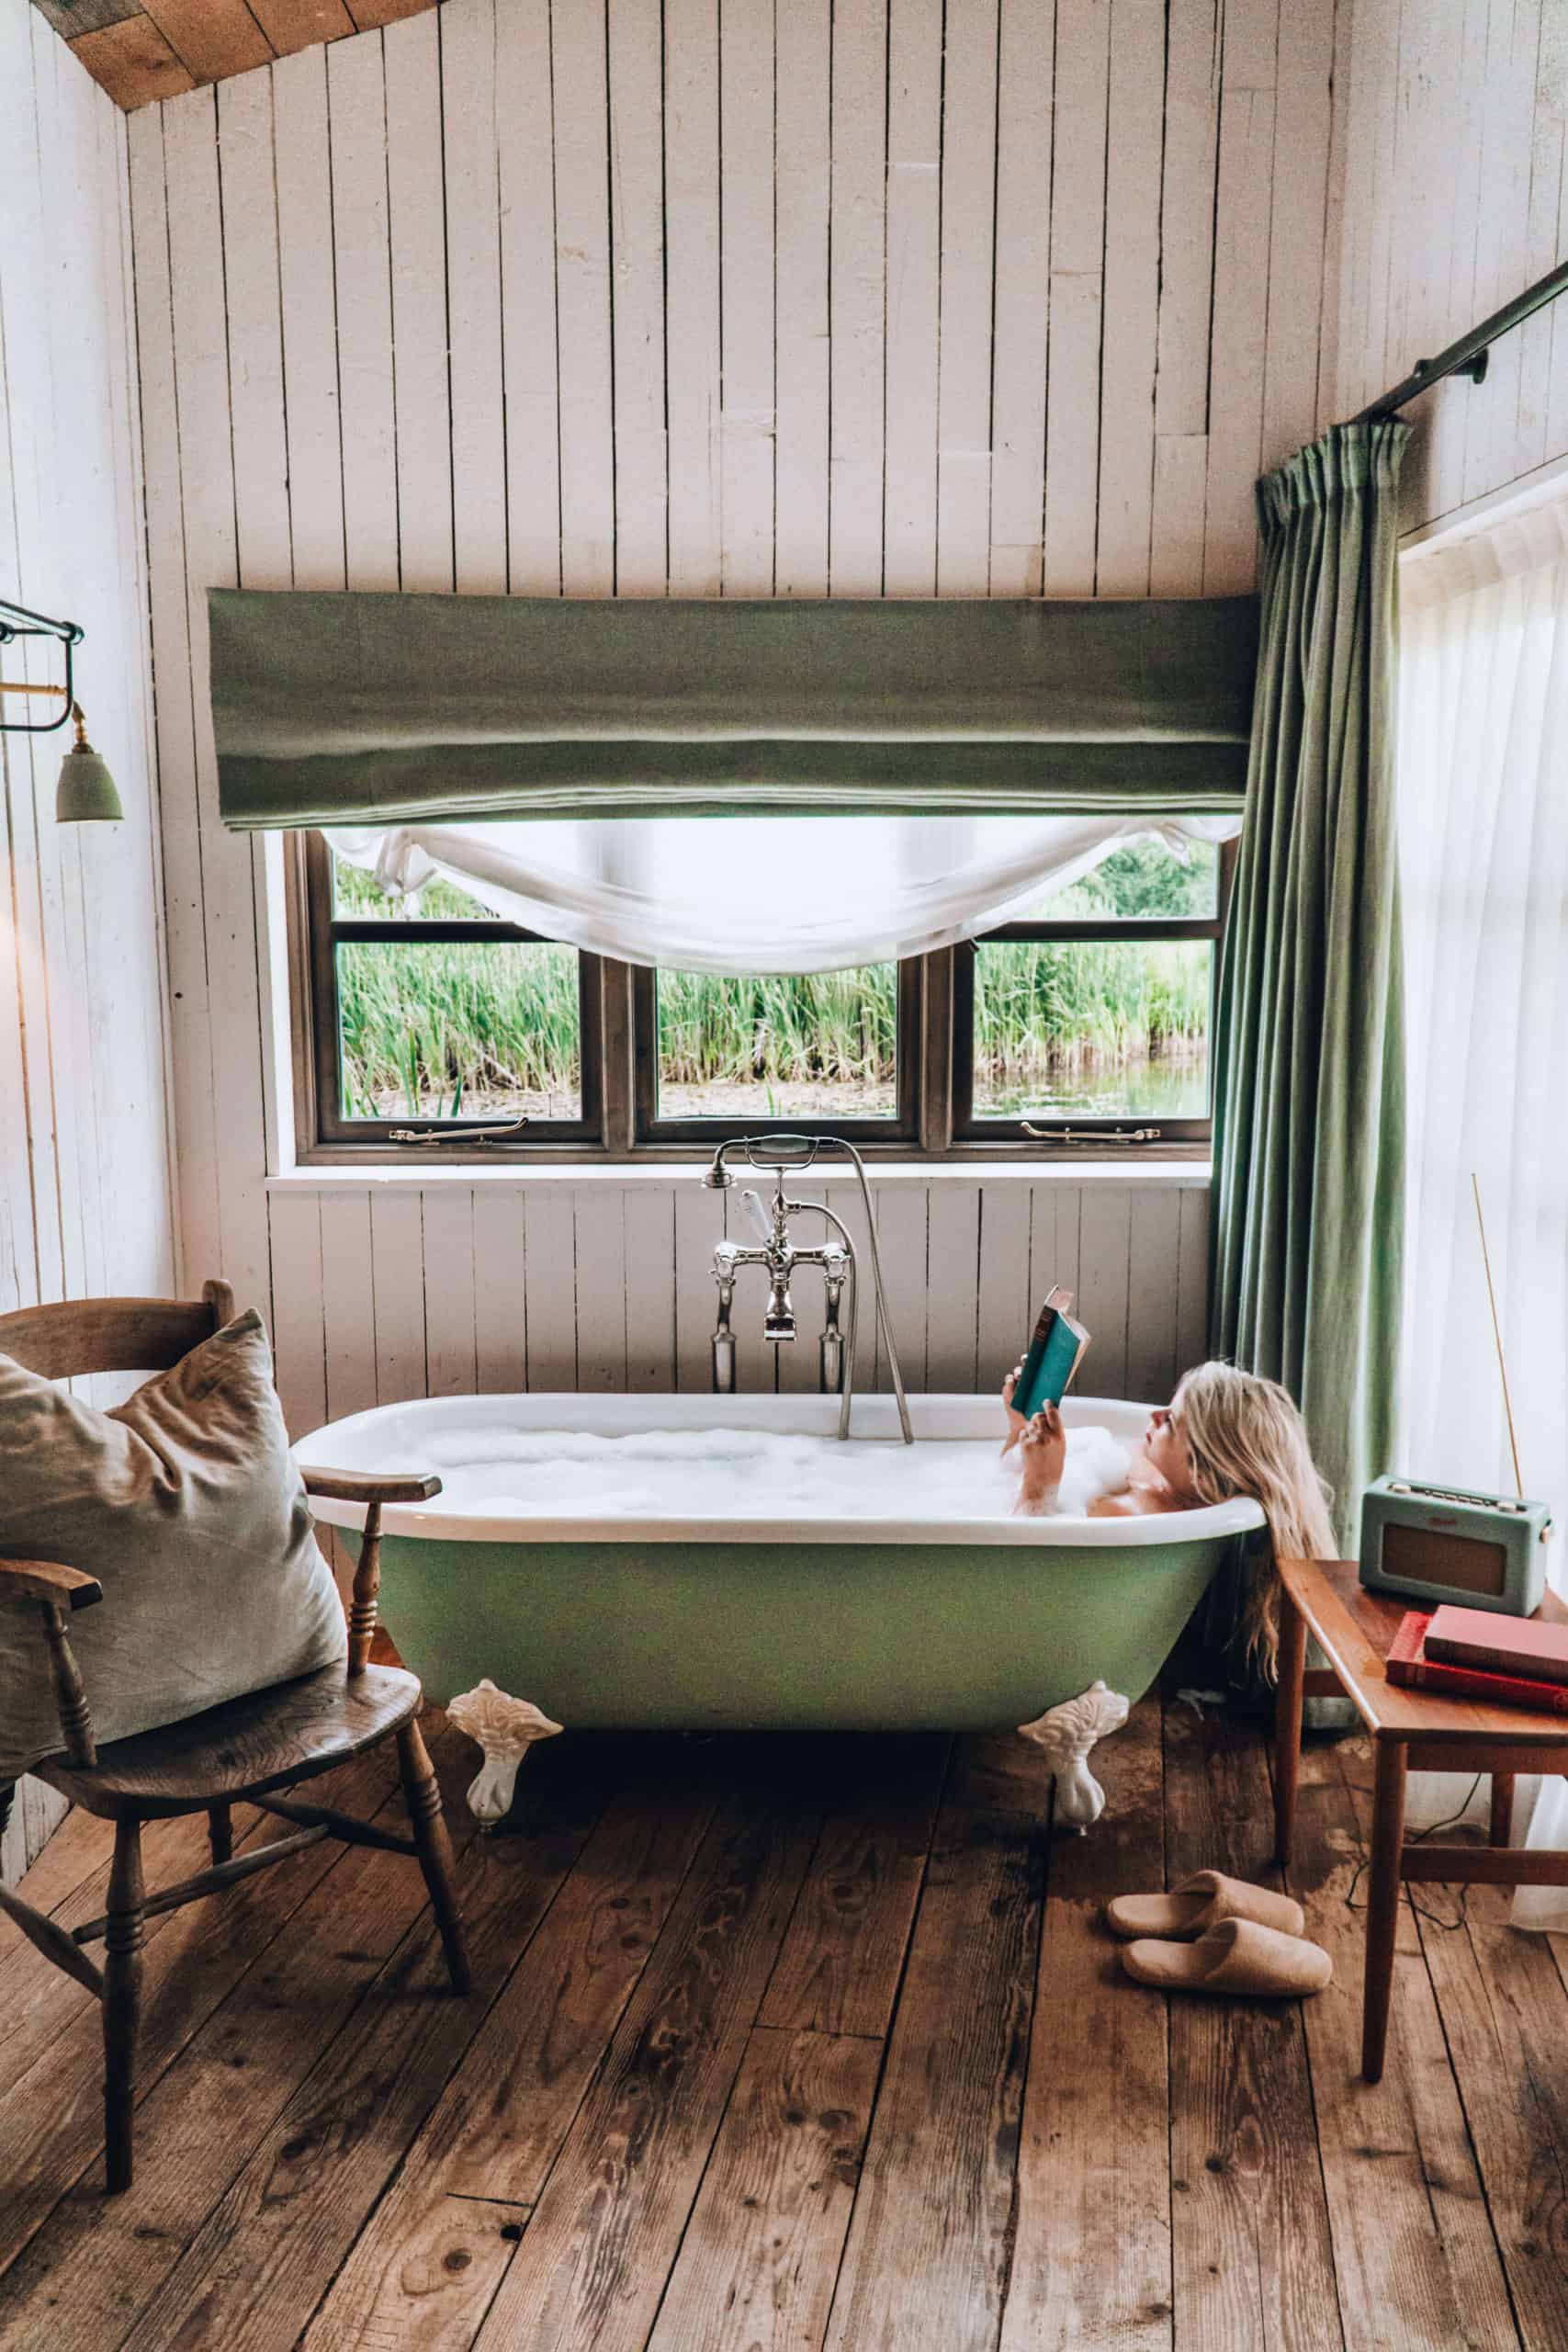 Soaking in the bathtub at Soho Farmhouse in the English Countryside | THE COTSWOLDS IN 20 PHOTOS